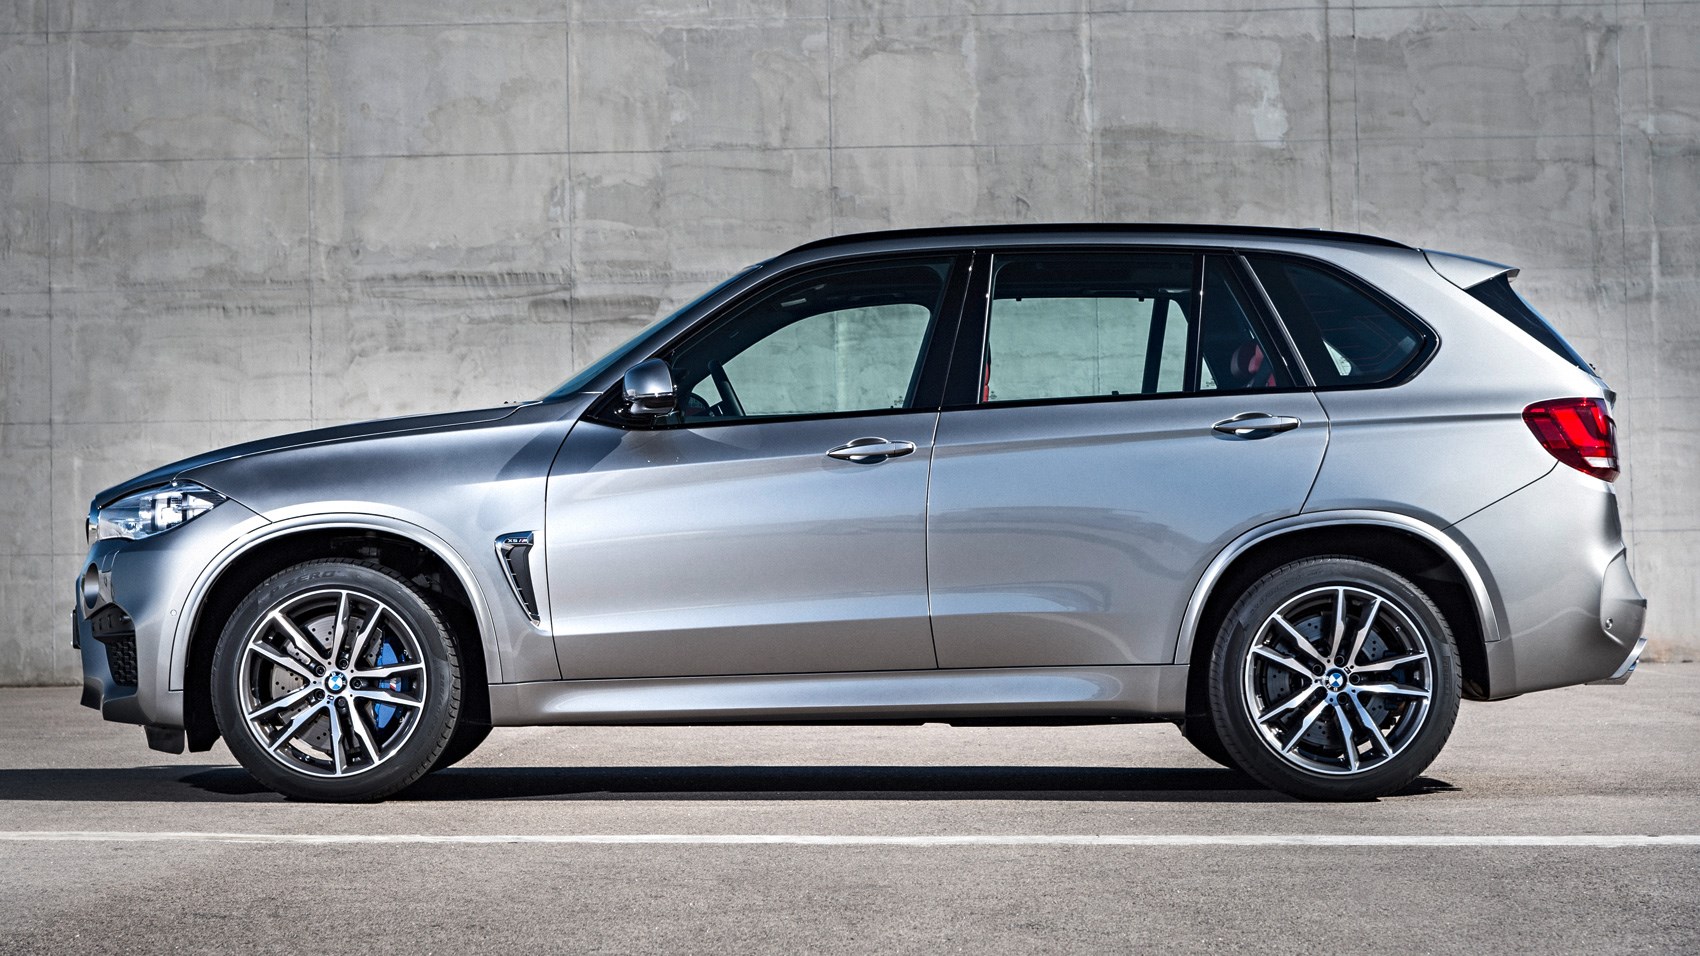 BMW X5 M (2017) review